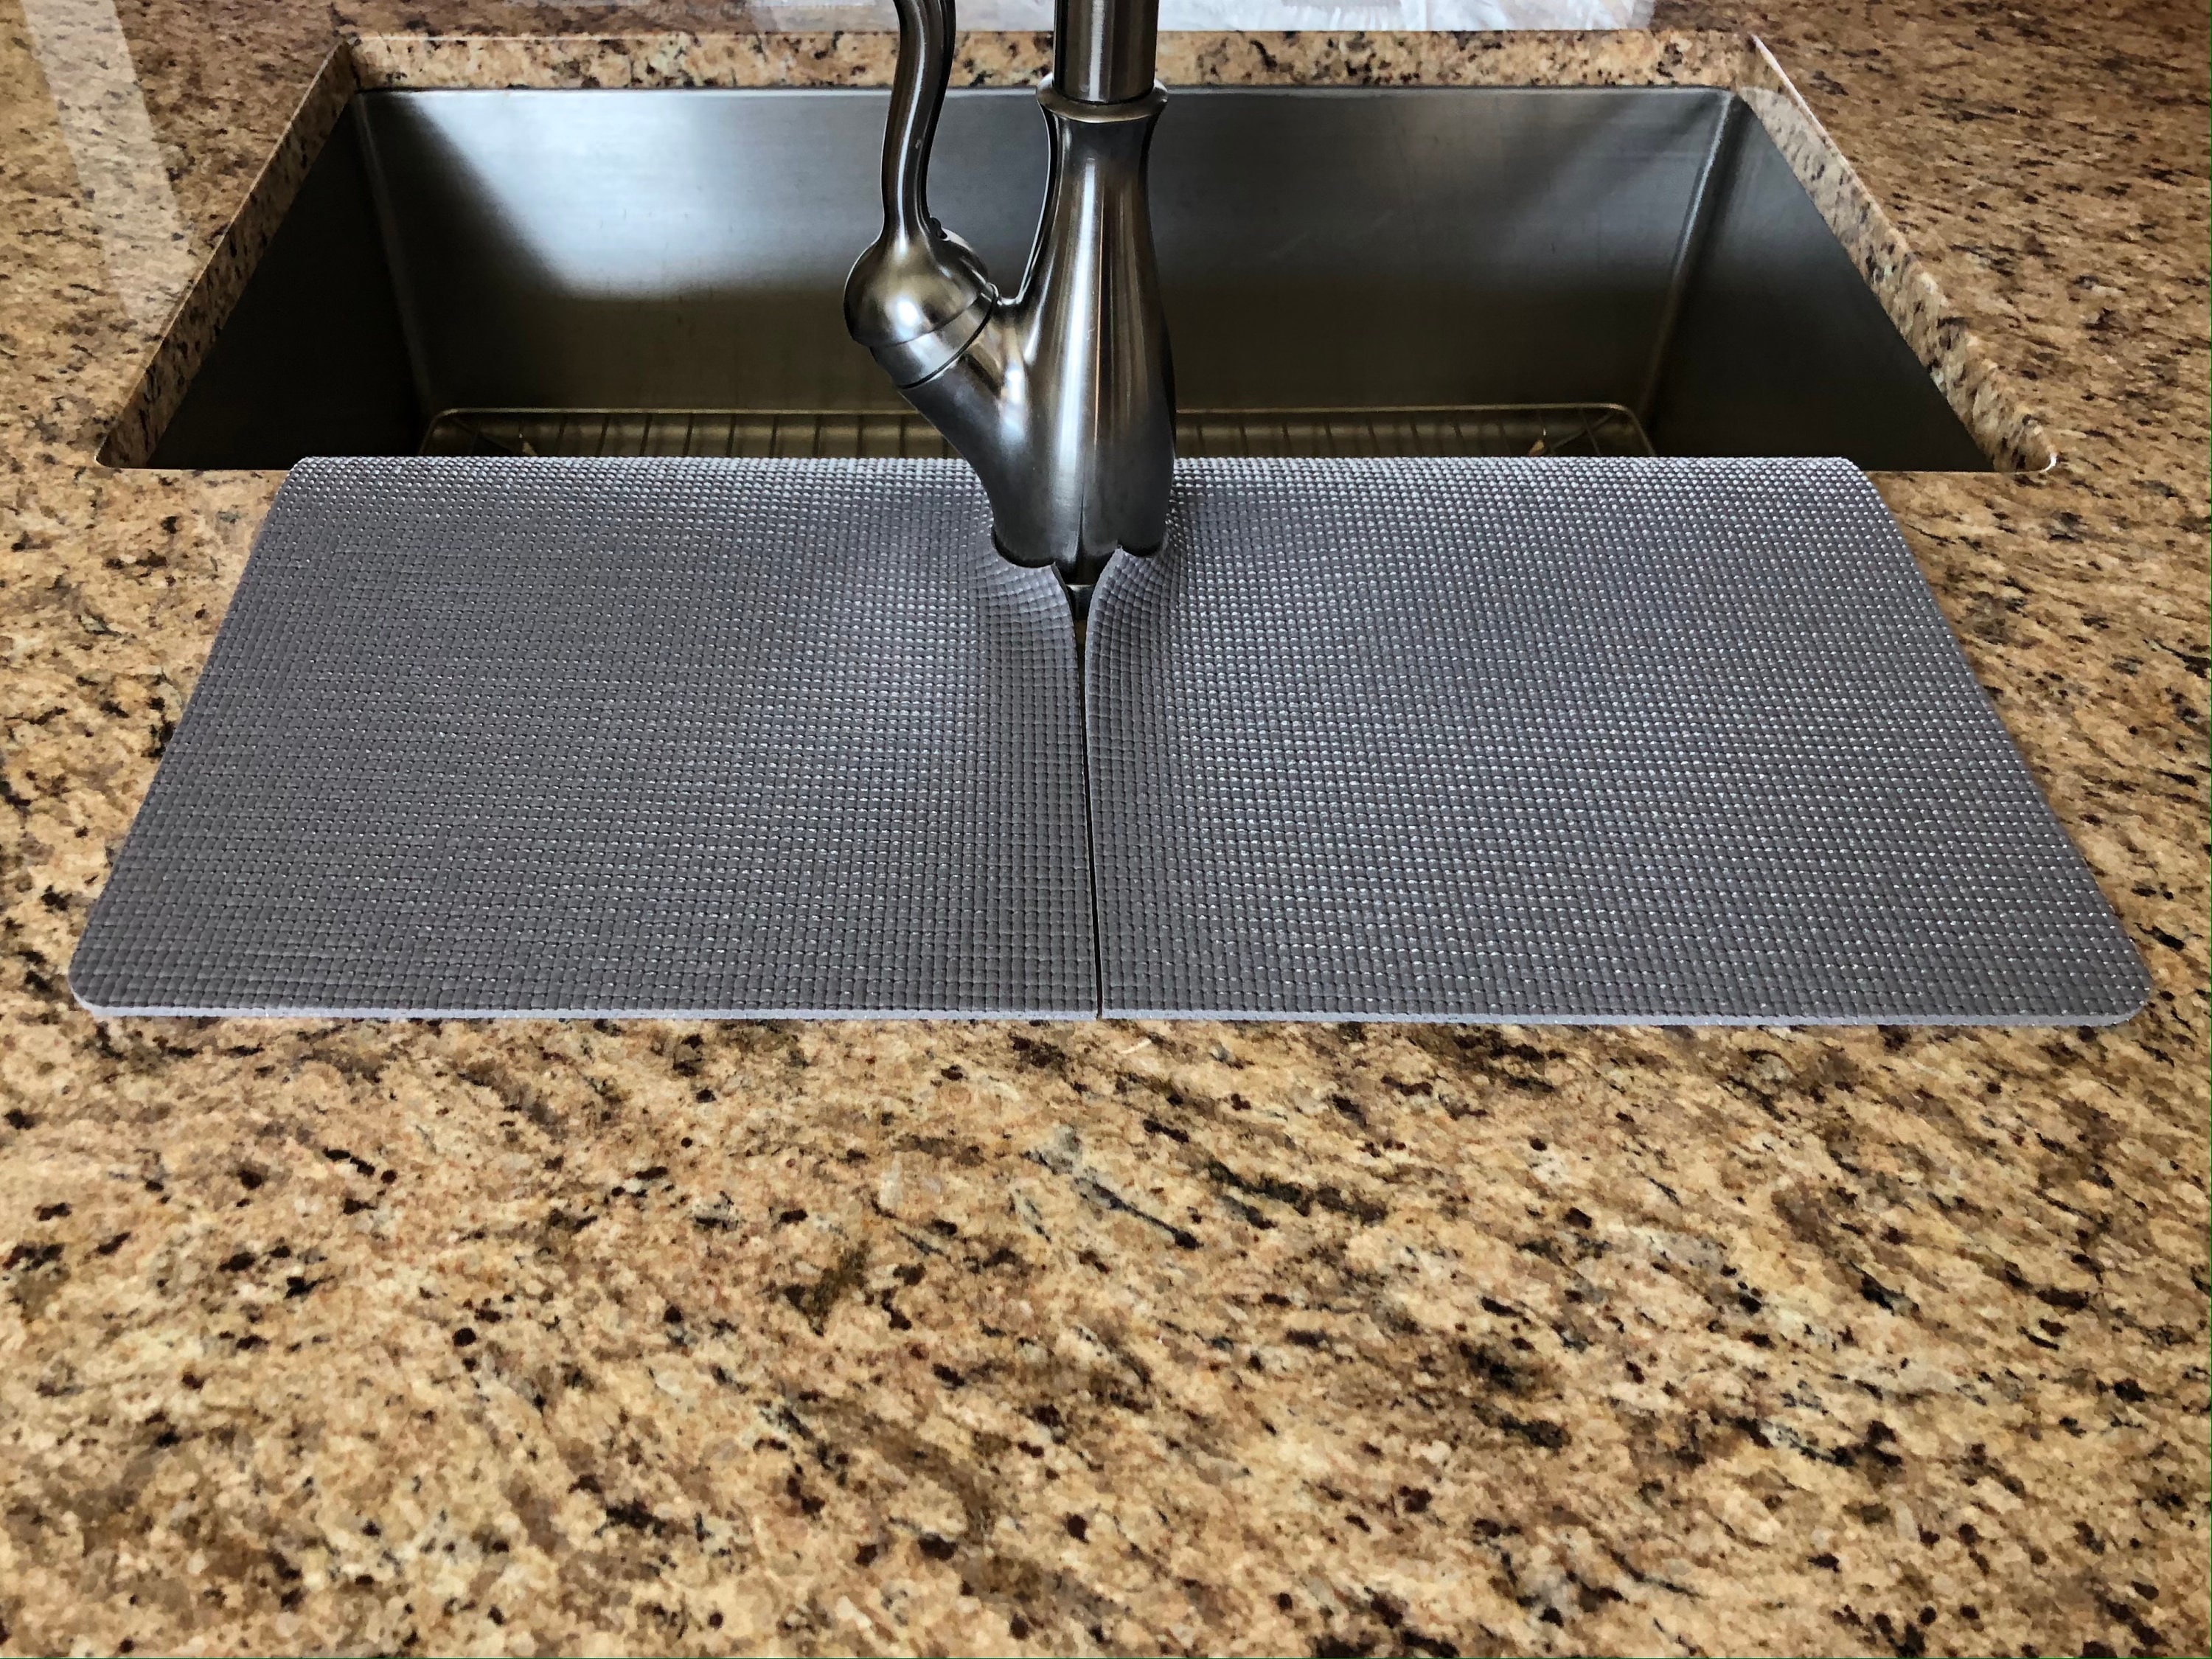 Black Double Sink FAUCET SPLASH GUARD, Drip Catcher, Kitchen Sink, Granite  Countertop Chip Protector, 12 in W X 27 in L, Patent Approved 